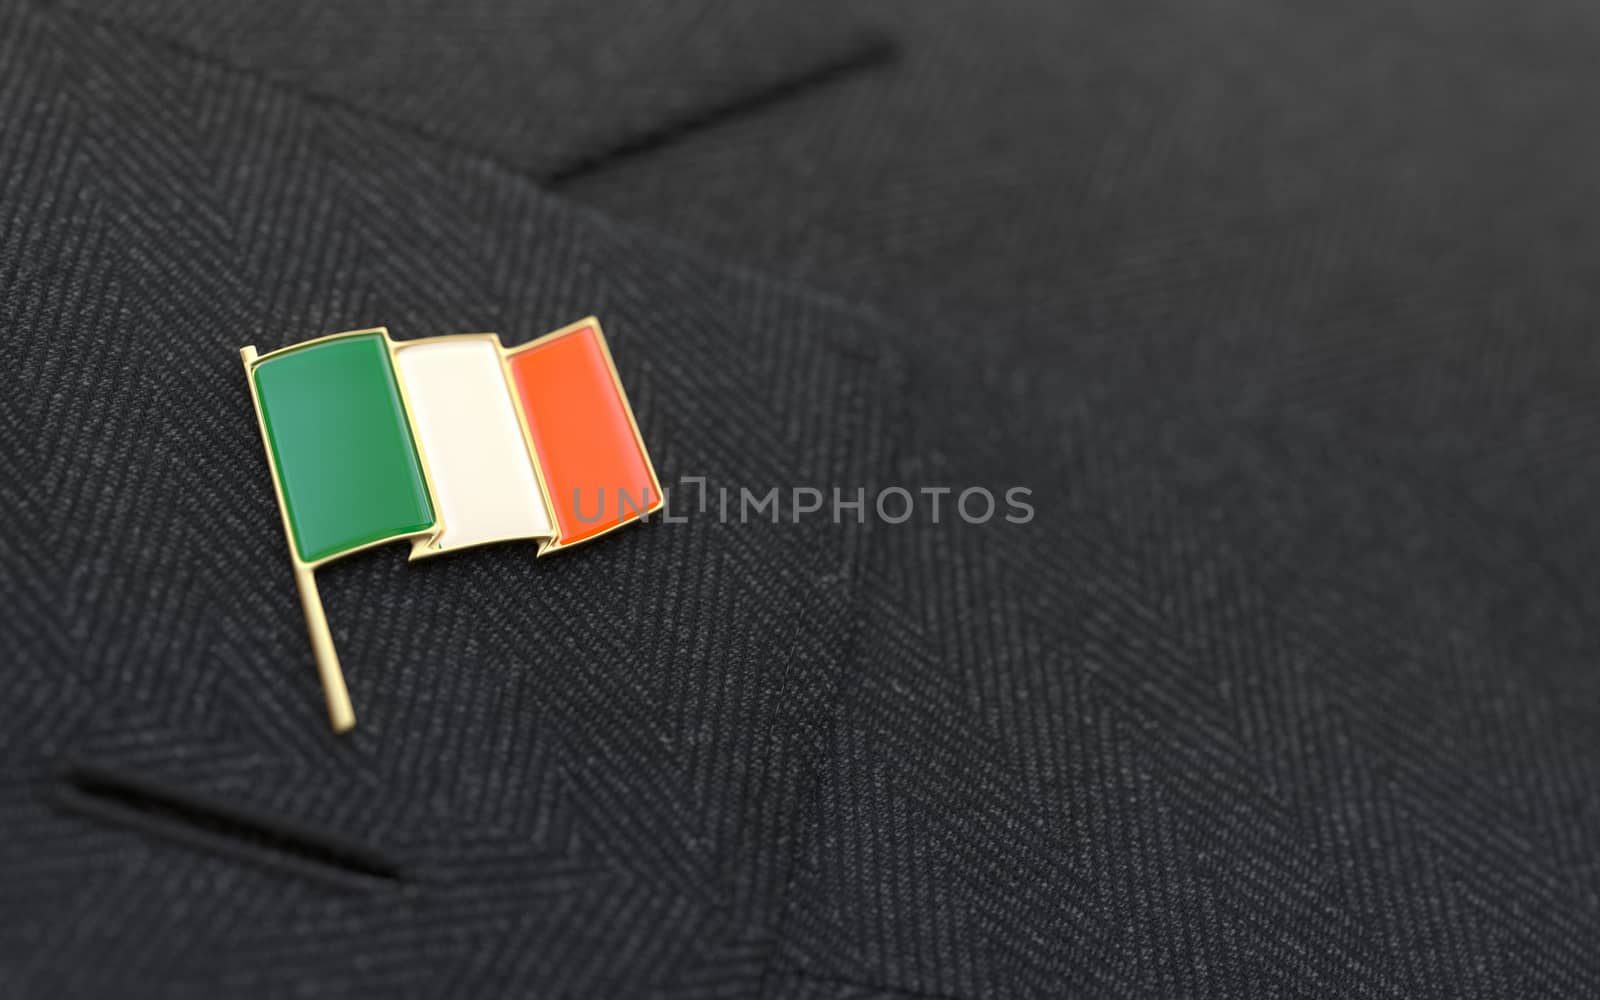 Ireland flag lapel pin on the collar of a business suit jacket shows patriotism